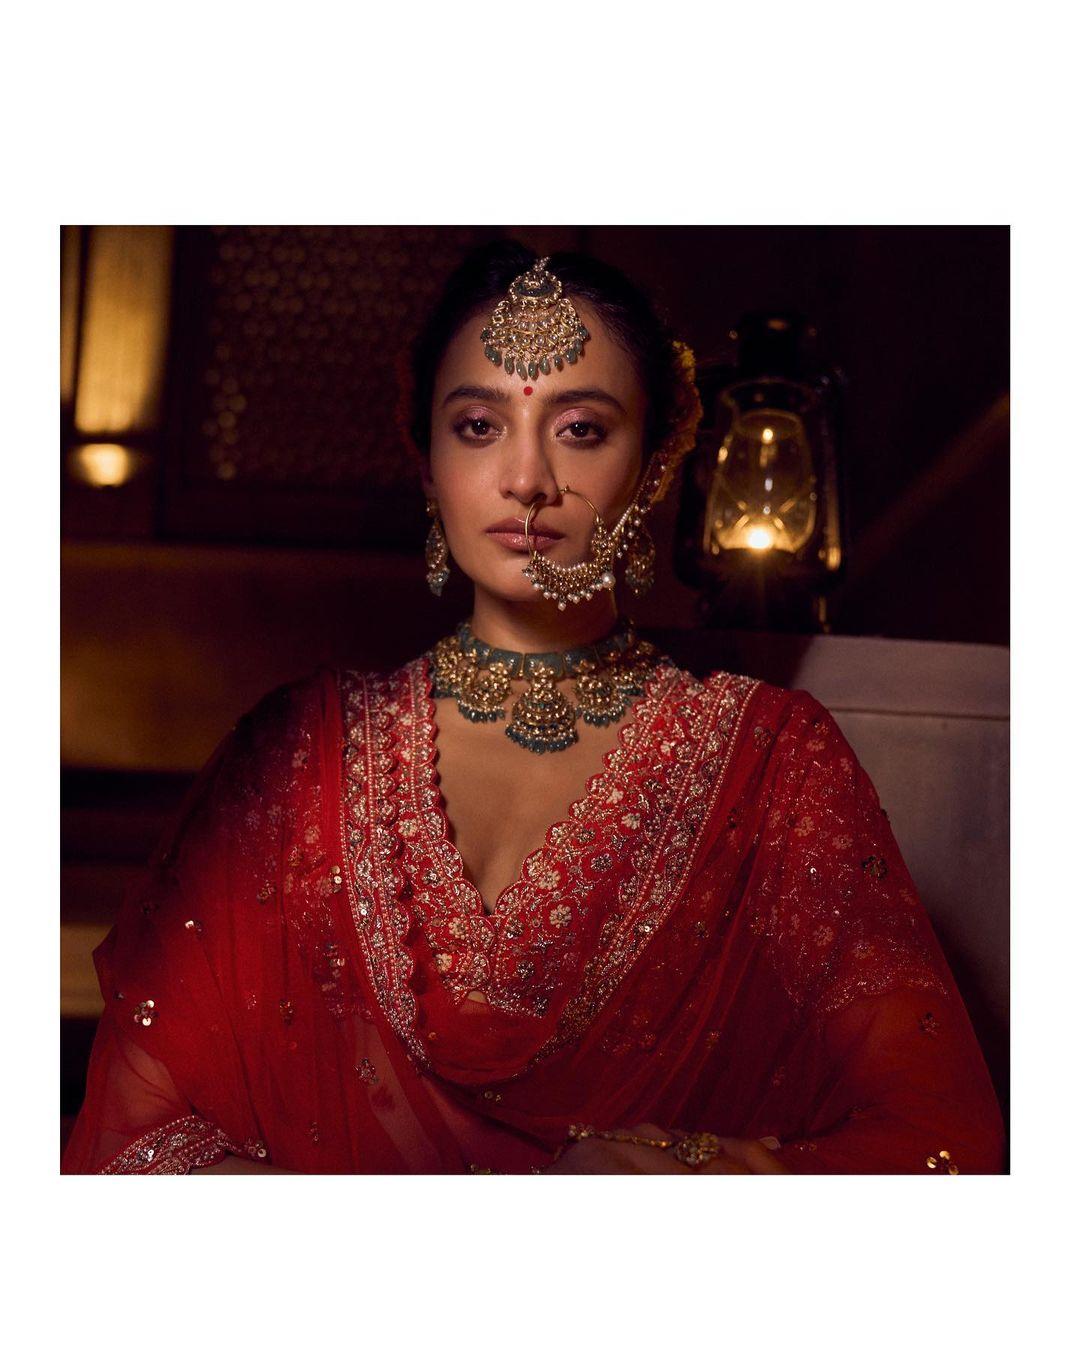 class="content__text"
 Teja Nath is the best in the show. An enticing piece of jewelry with diamonds, pearls and the perfect dose of sparkle.

 #AnitaDongrePinkCity #AnitaDongre #FineJewelry 

WhatsApp us on +91 9999313366 to know more. 
 